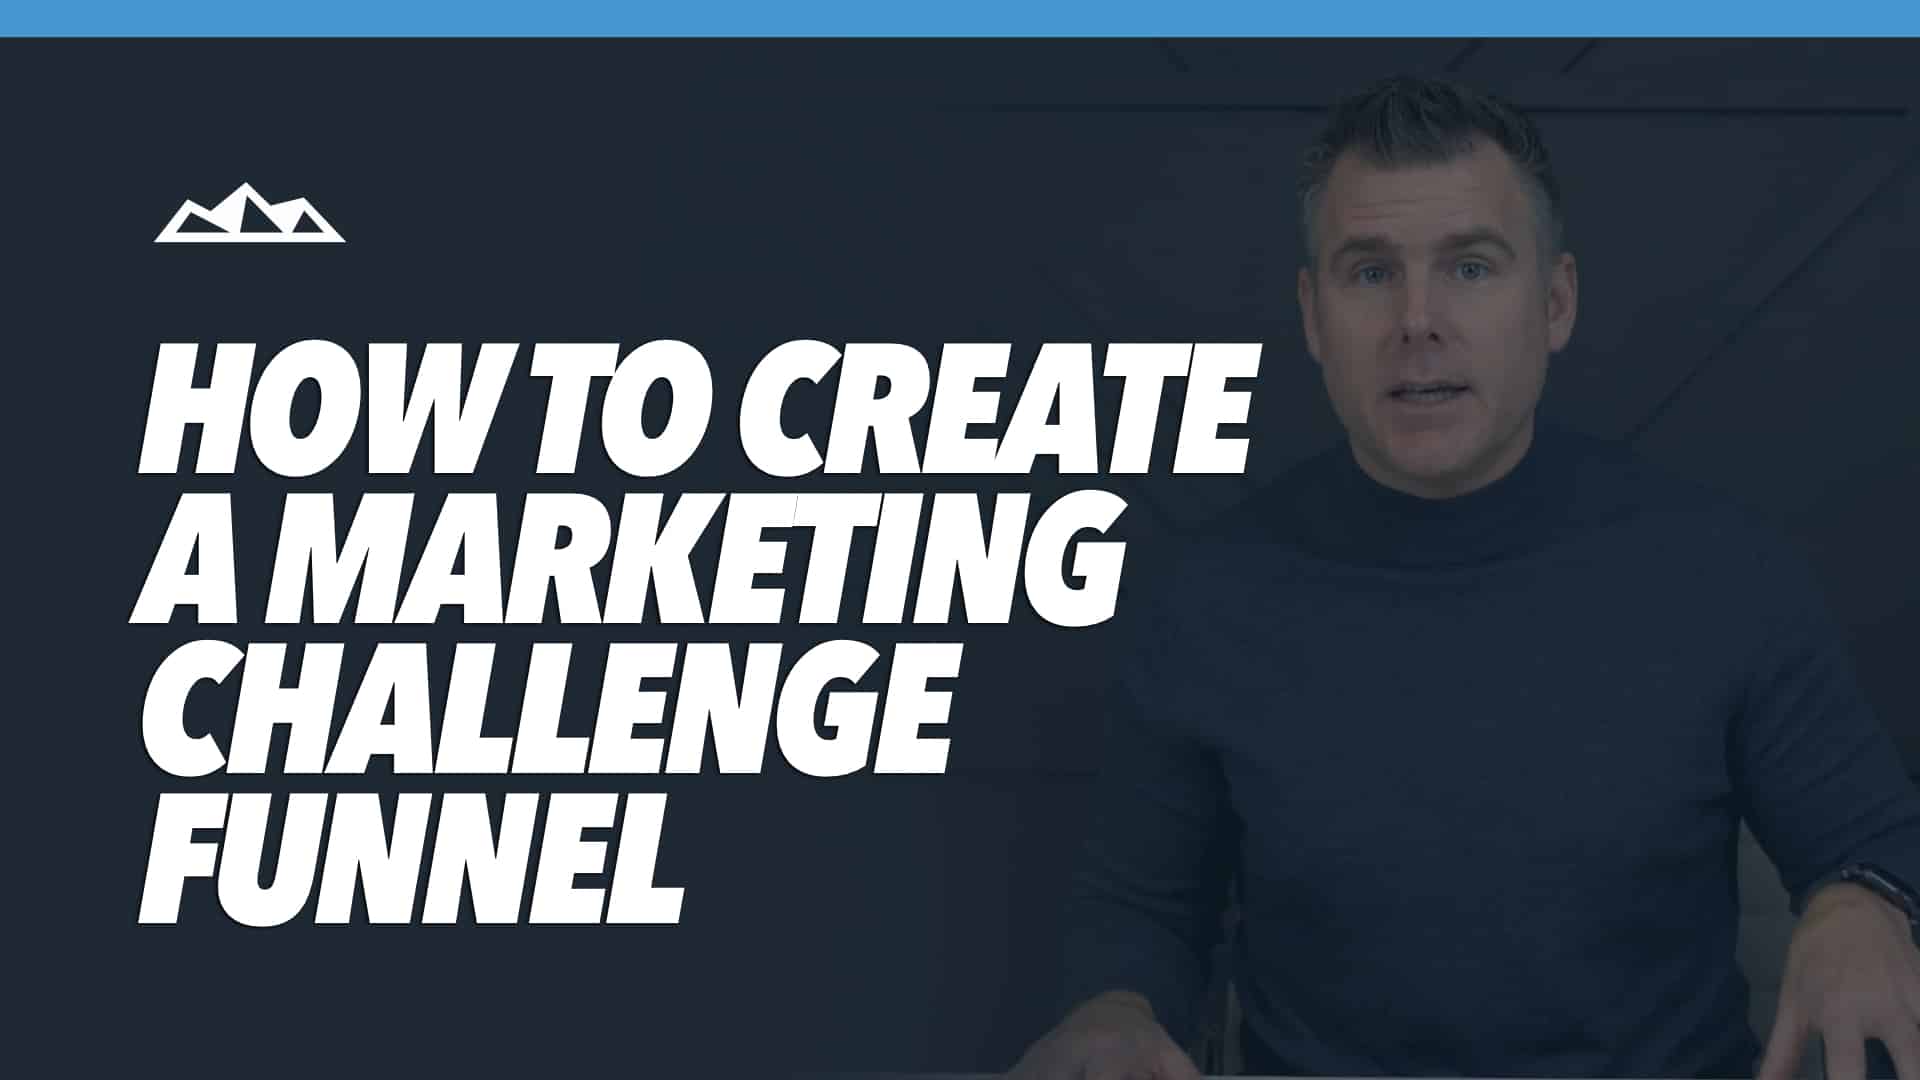 Successful Marketing Challenge Funnels: Examples & How to Build One For Your Business